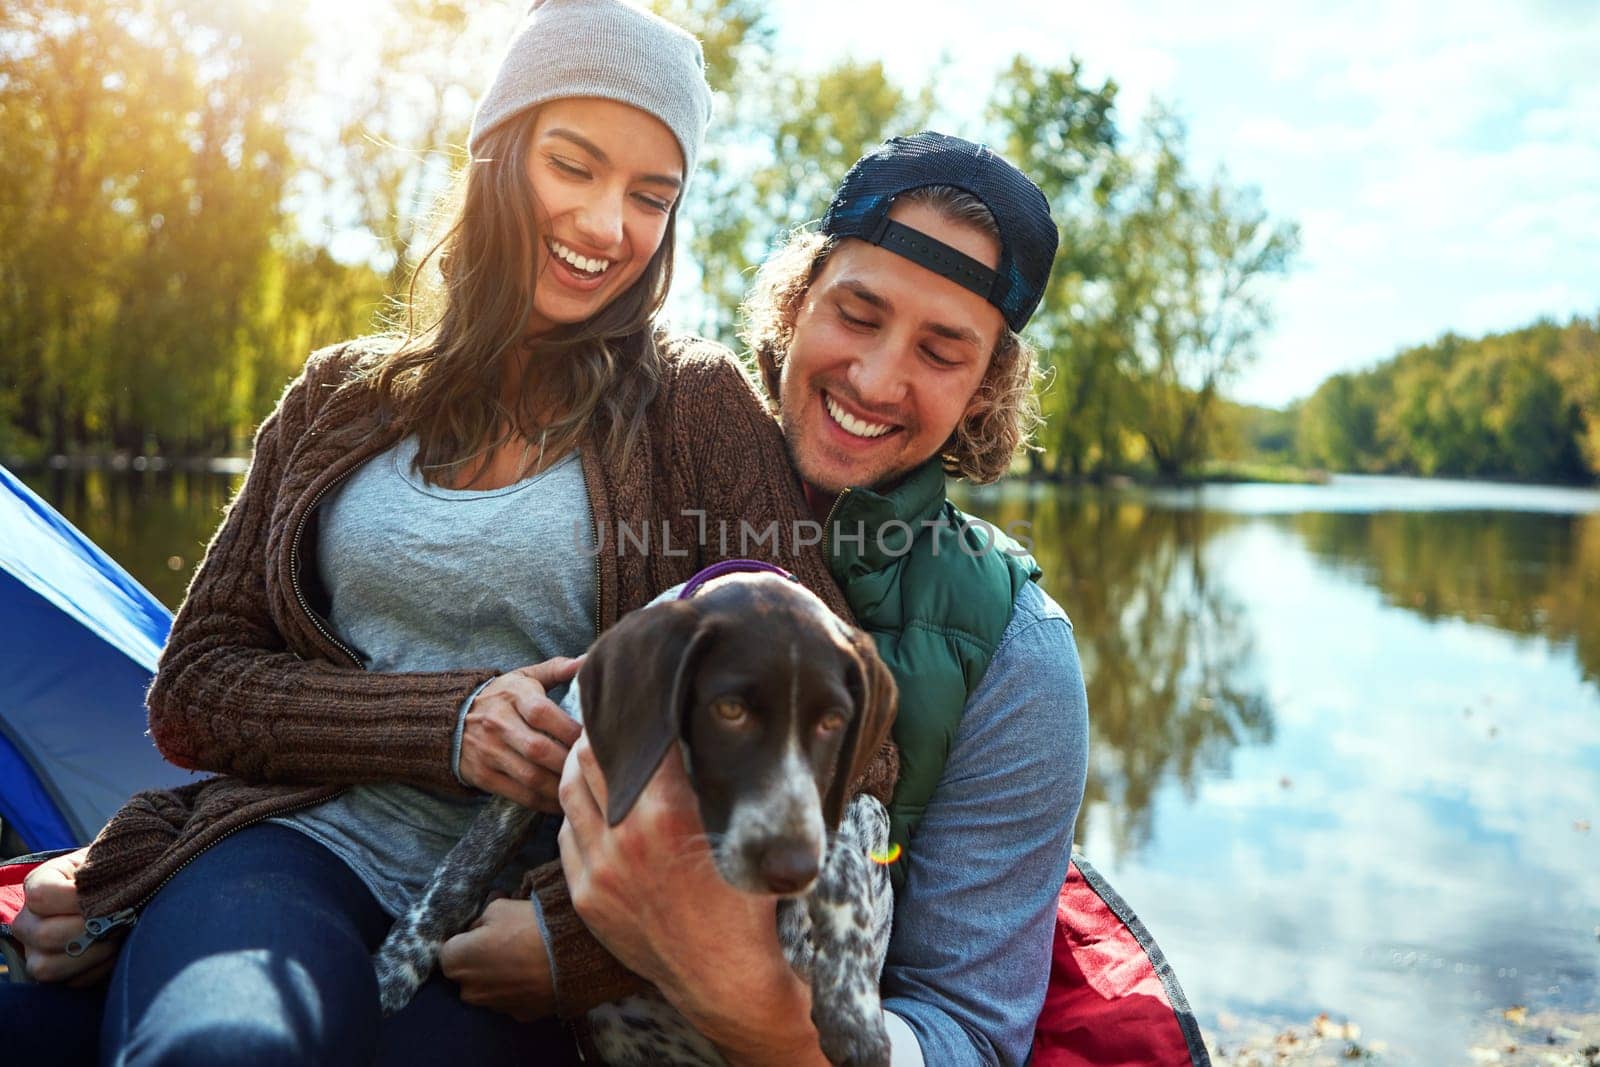 Taking our bonding time outdoors. a loving couple out camping with their dog